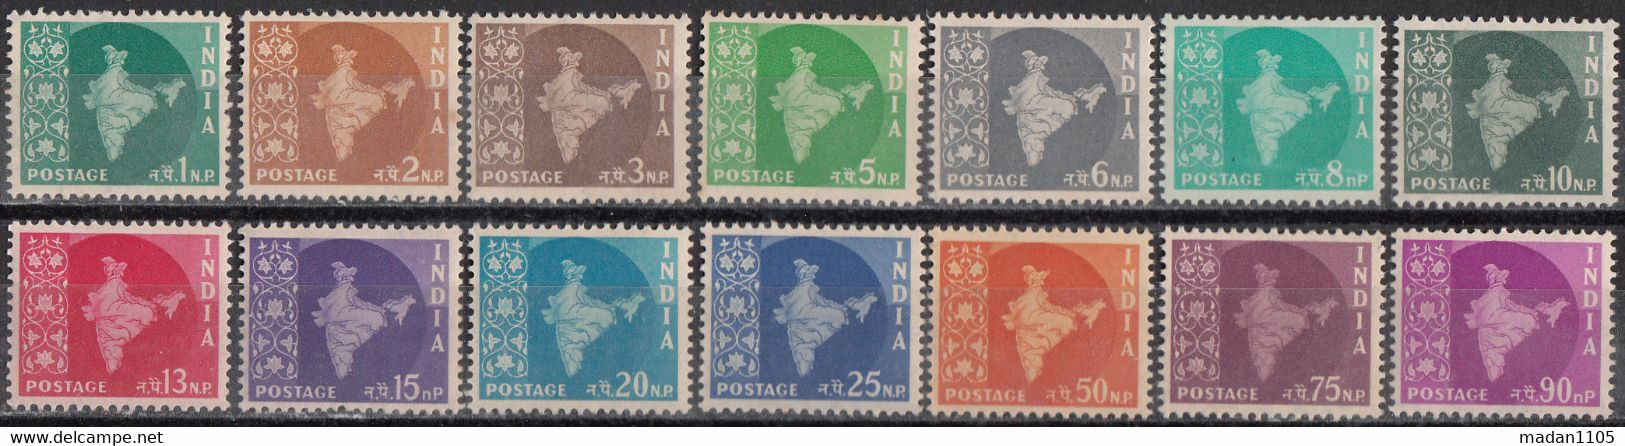 INDIA 1957 58 MAP Series  Definitives With Map Of India On Each Stamp 14 Values Complete.Wmk Star/Ashoka  MNH(**) - Nuevos